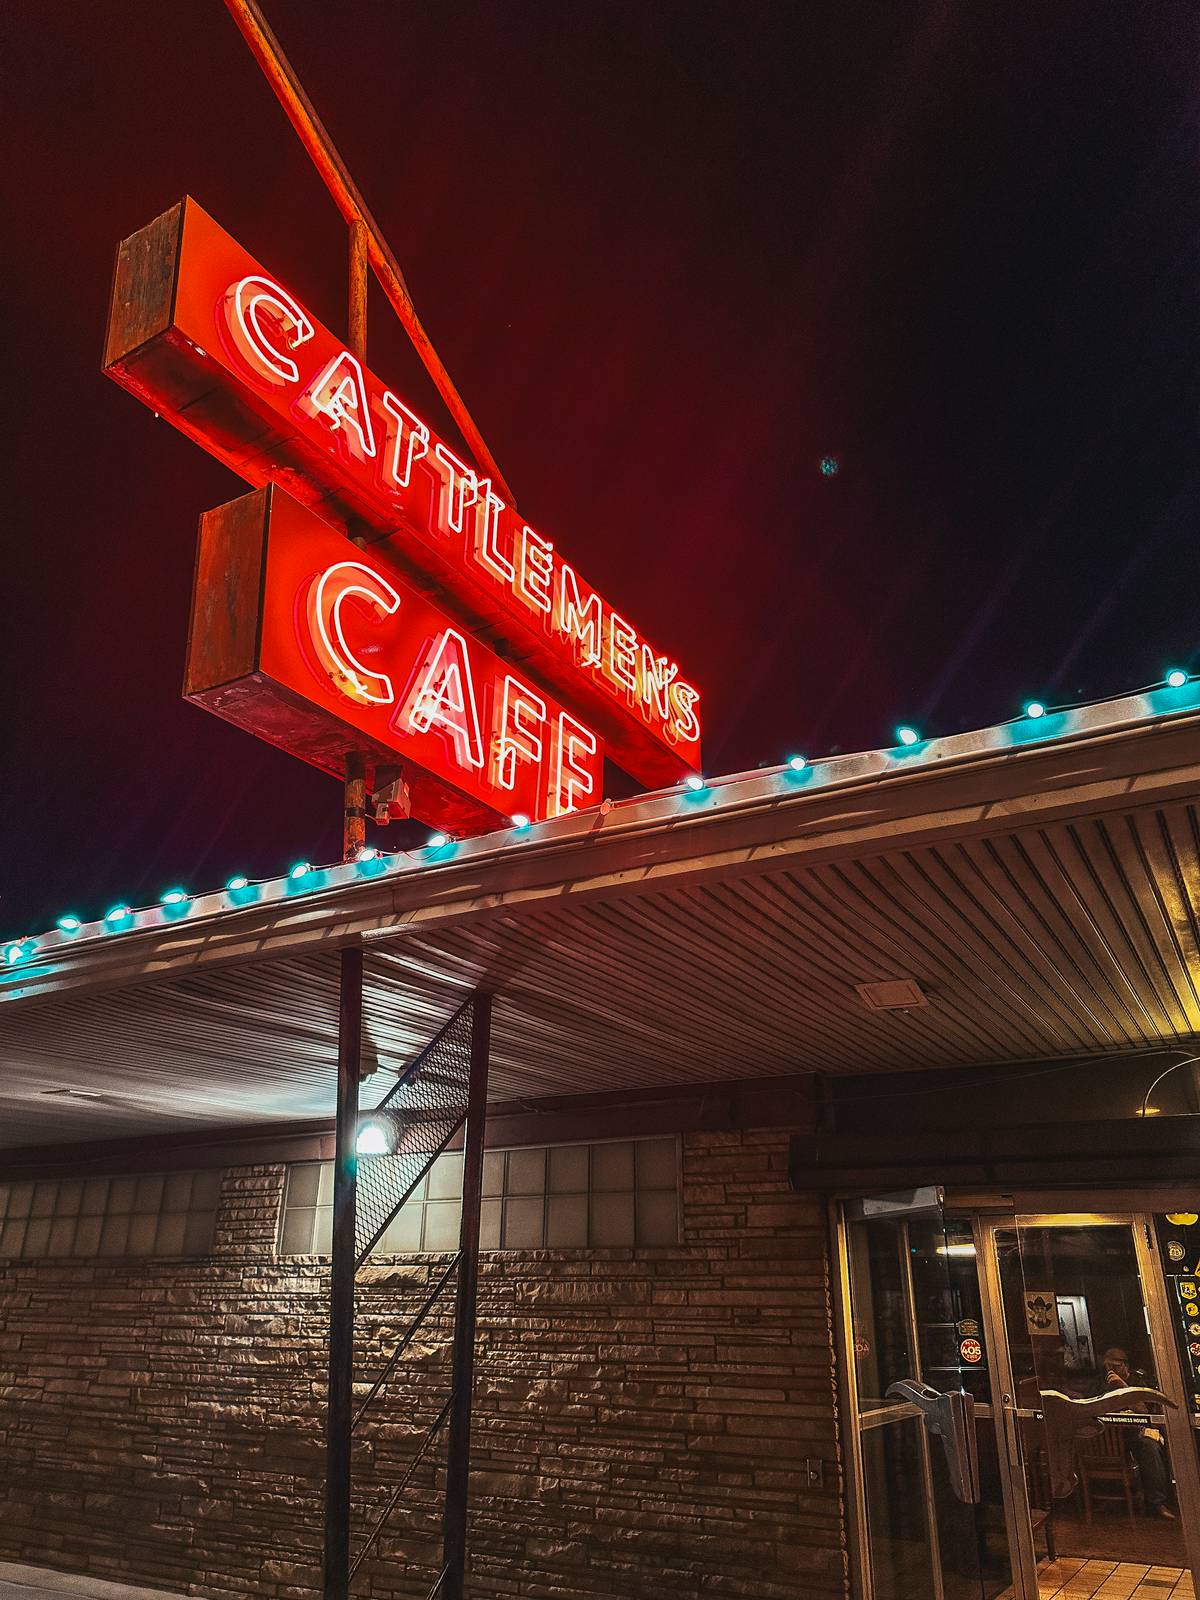 Cattlemens Cafe in Oklahoma City